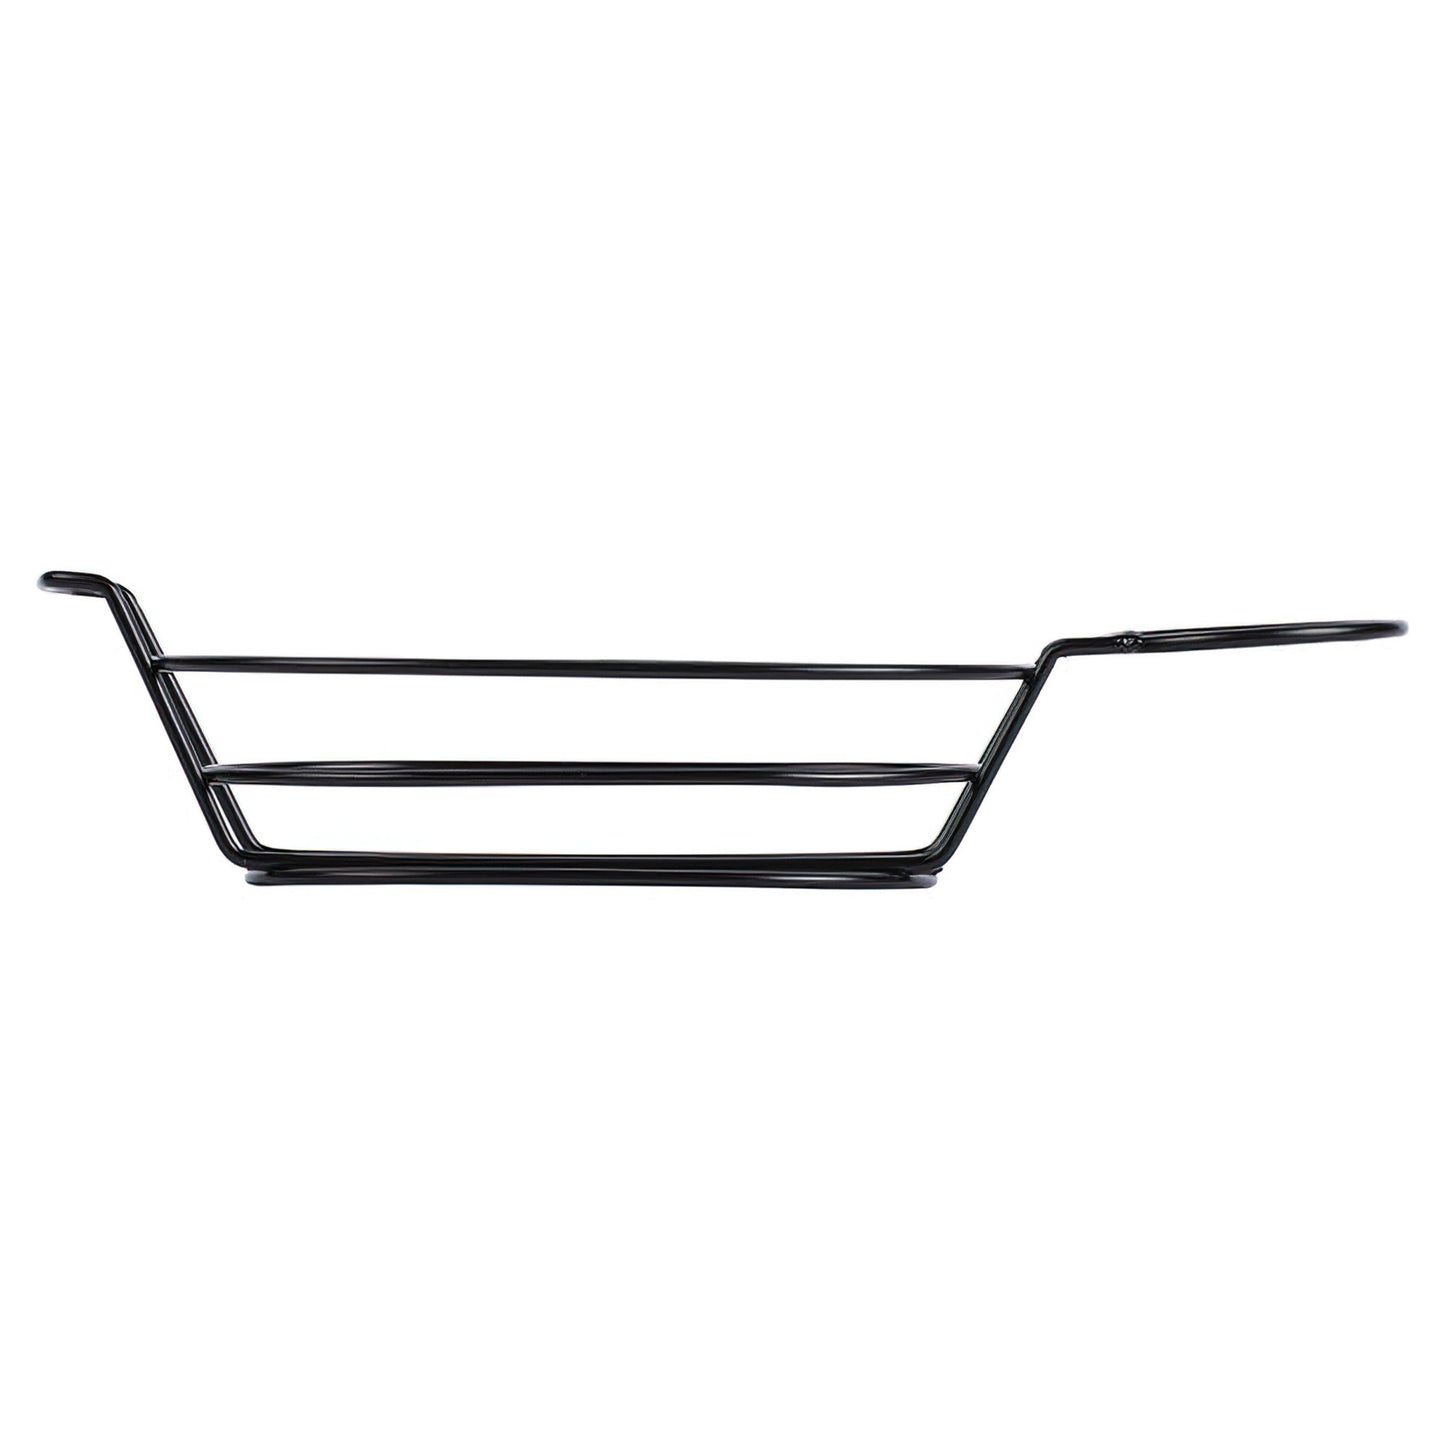 13.25" x 6" Oval Basket w/ Handle and 1 Holder, 2" Tall (Fits 4-84100, 4-84111, 4-84105, RM-203, S-620, F-625, ER-025)